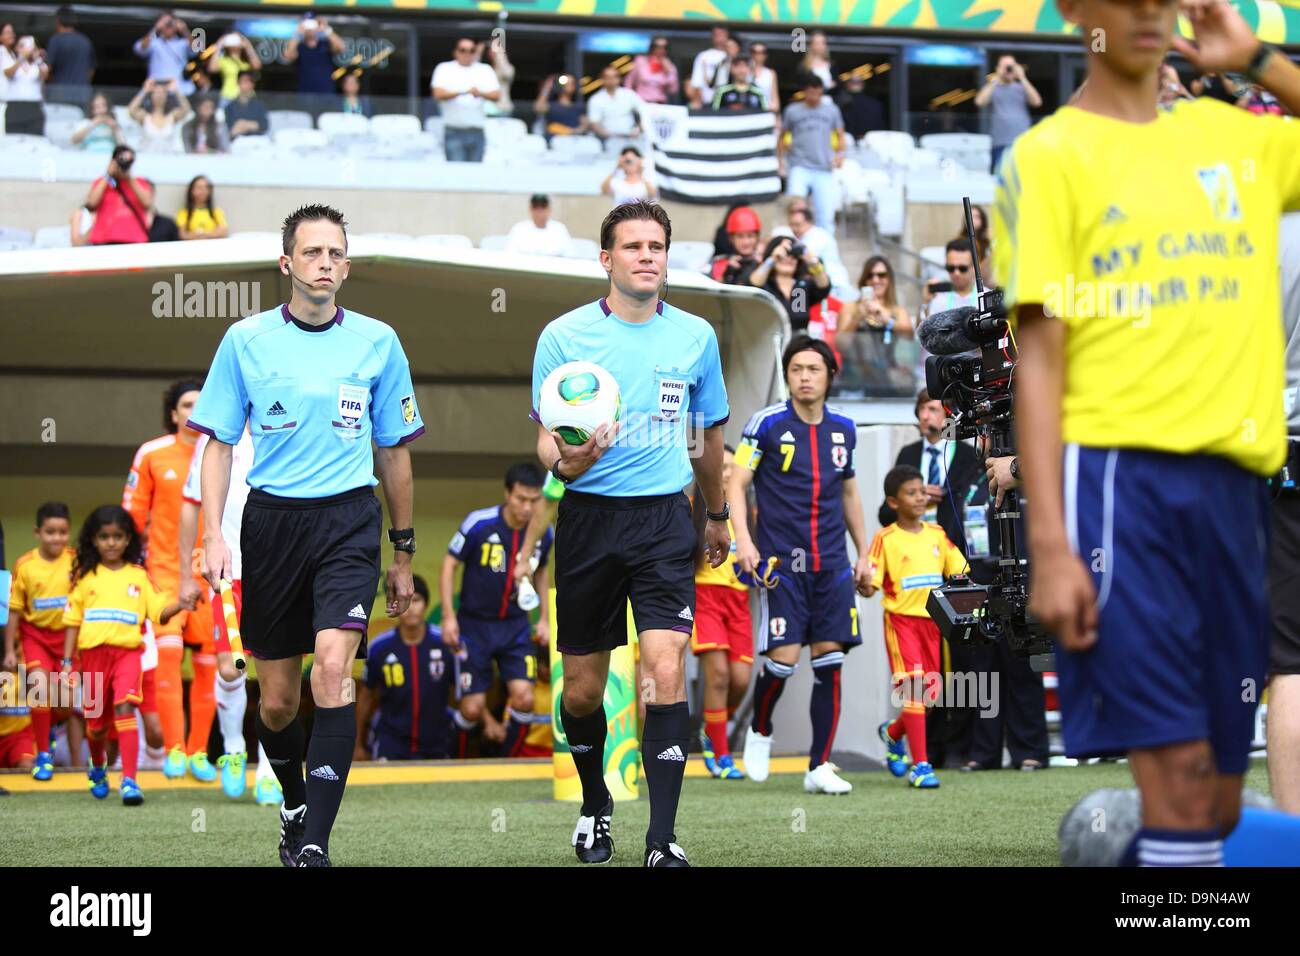 Referees, JUNE 22, 2013 - Football / Soccer : FIFA Confederations Cup Brazil 2013, Group A match between Mexico 2-1 Japan at Mineirao Stadium in Belo Horizonte, Brazil. (Photo by Toshihiro Kitagawa/AFLO) Stock Photo